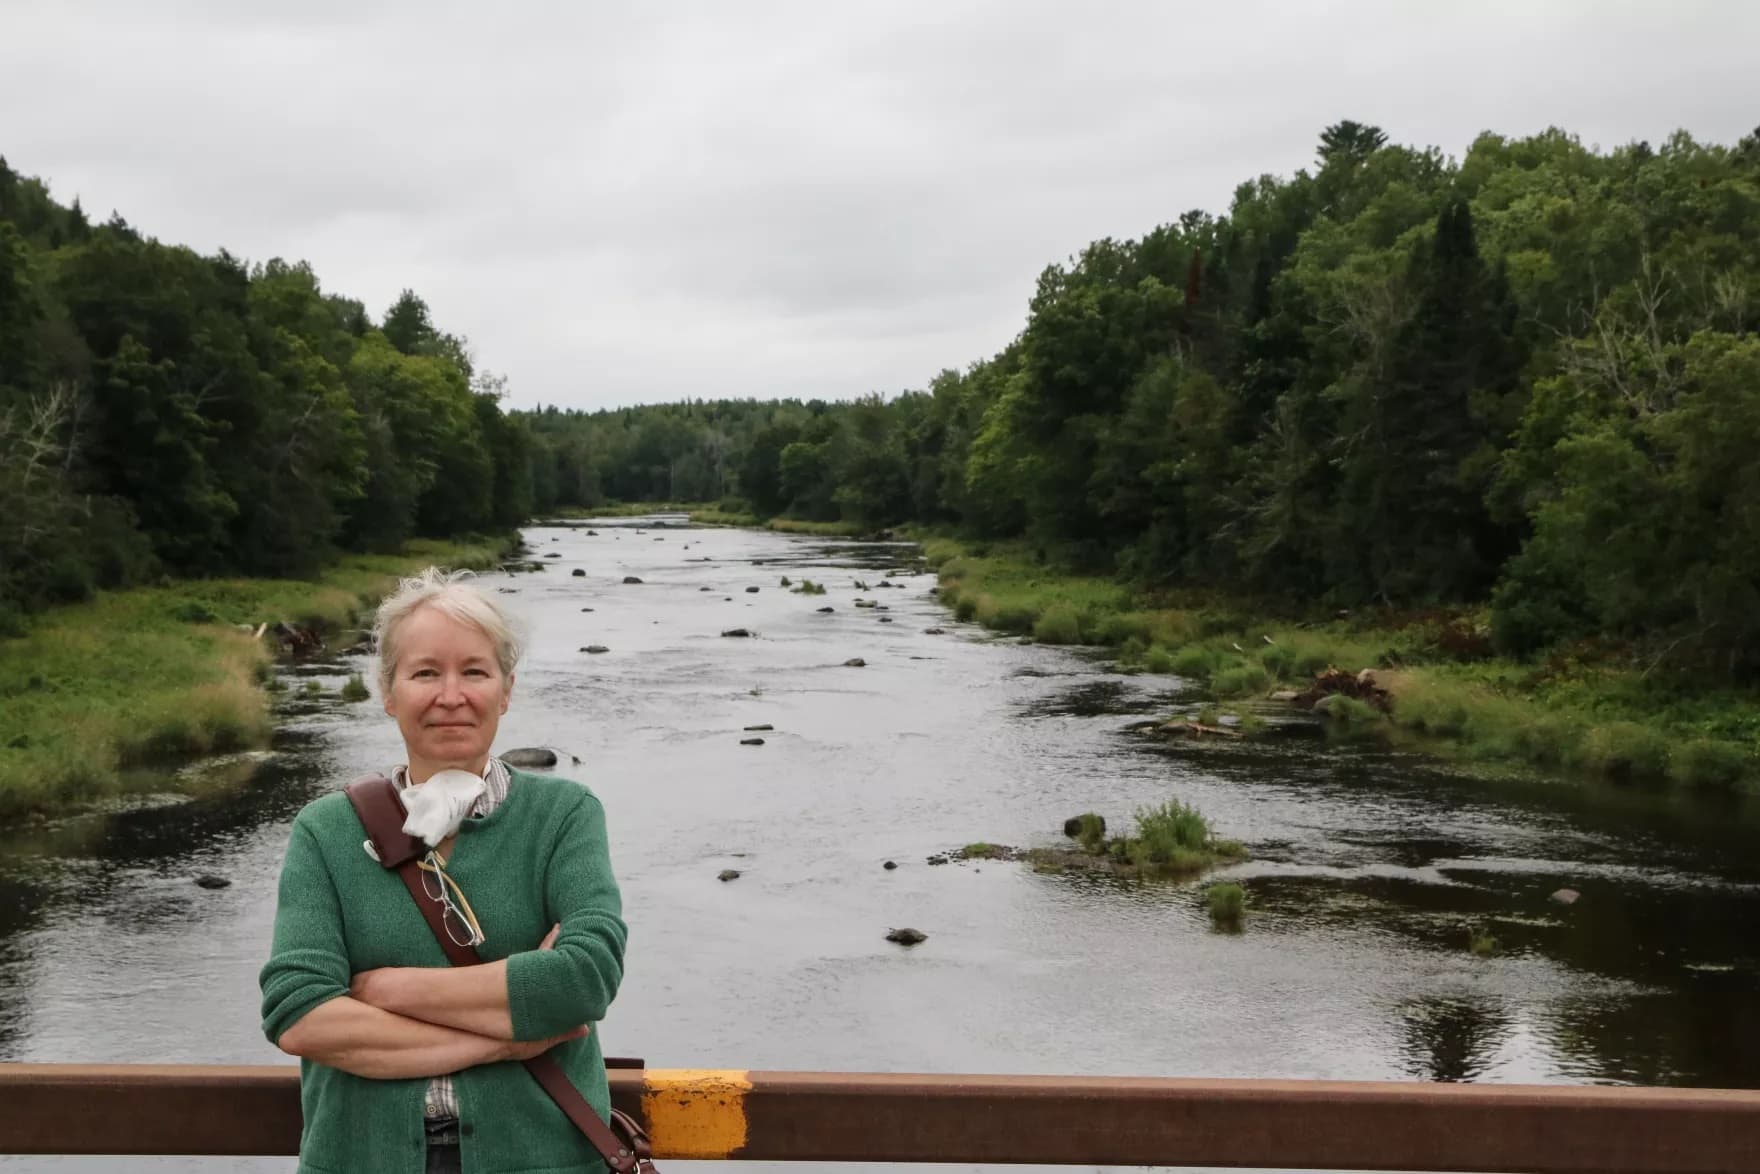 Sharri Venno, environmental planner for the Houlton Band of Maliseet Indians, stands in front of a section of Meduxnekeag River that's been restored to a more natural state that better suits salmon and other native species. (Murray Carpenter/Maine Public)